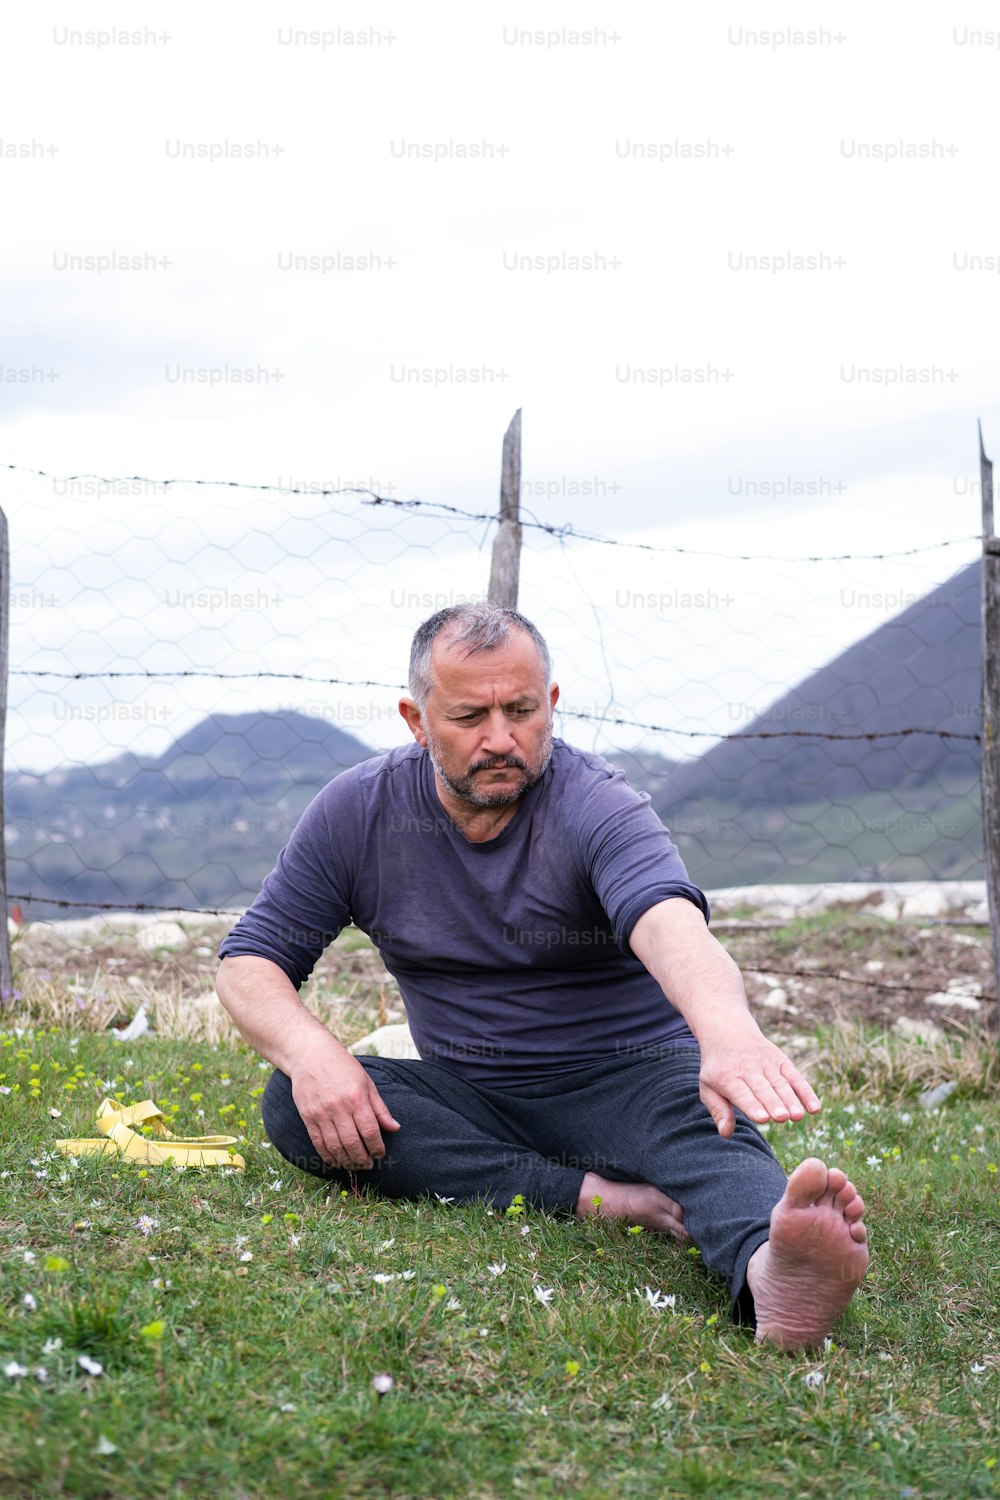 a man sitting on the ground in a field